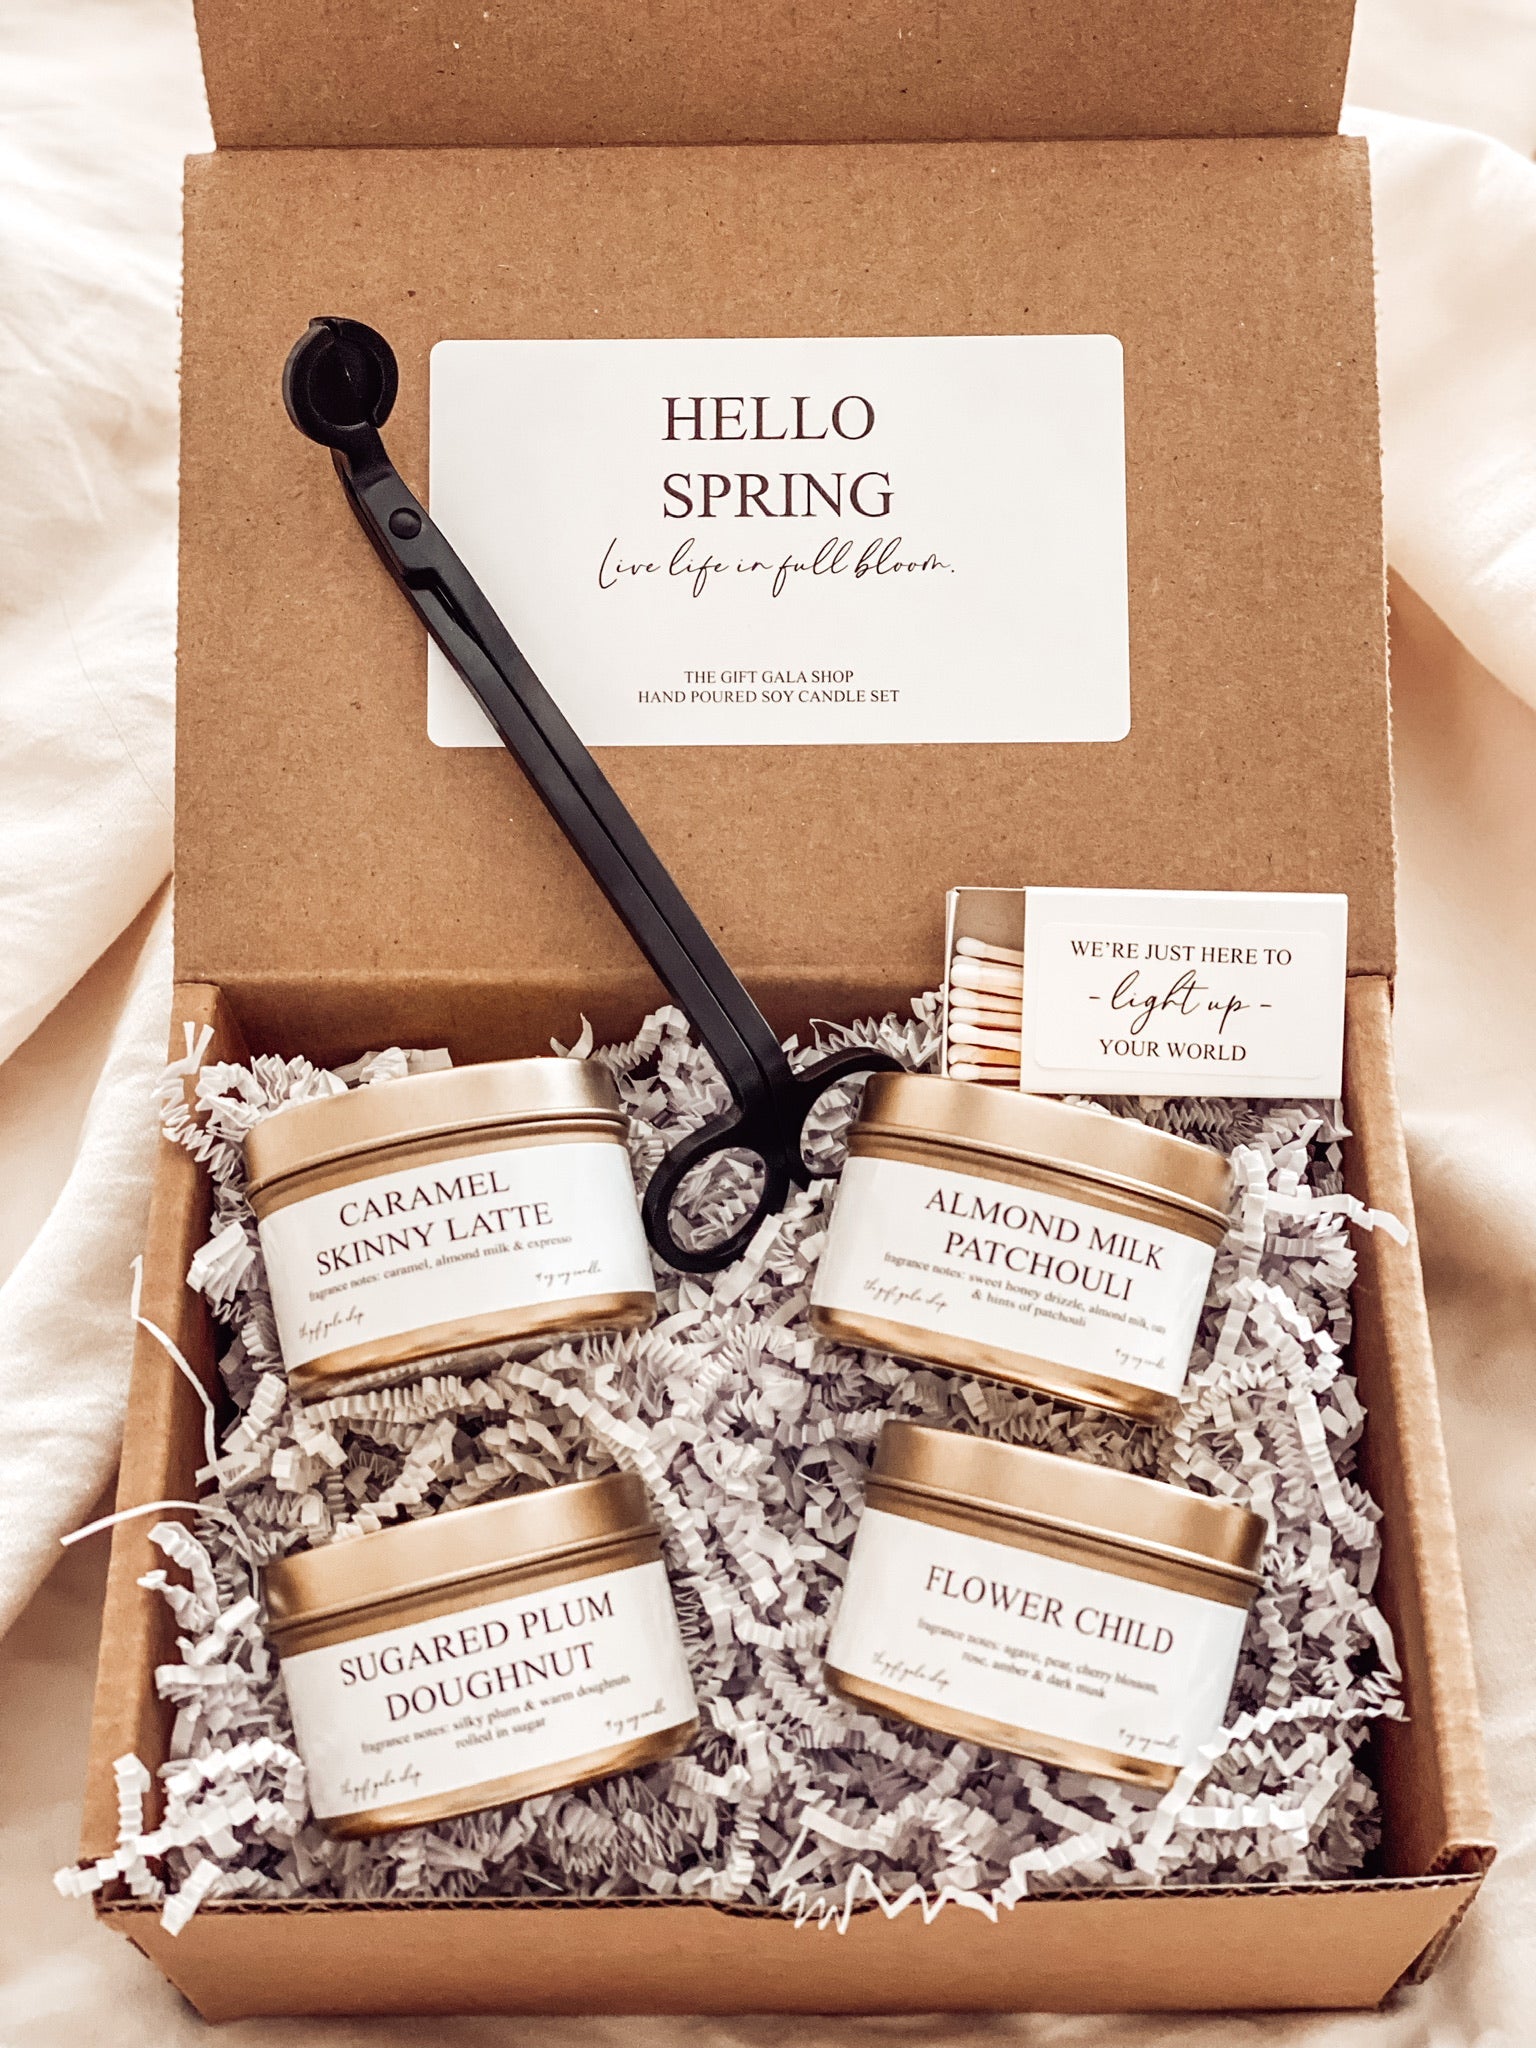 Sample Subscription Boxes: The End of a Business Model?